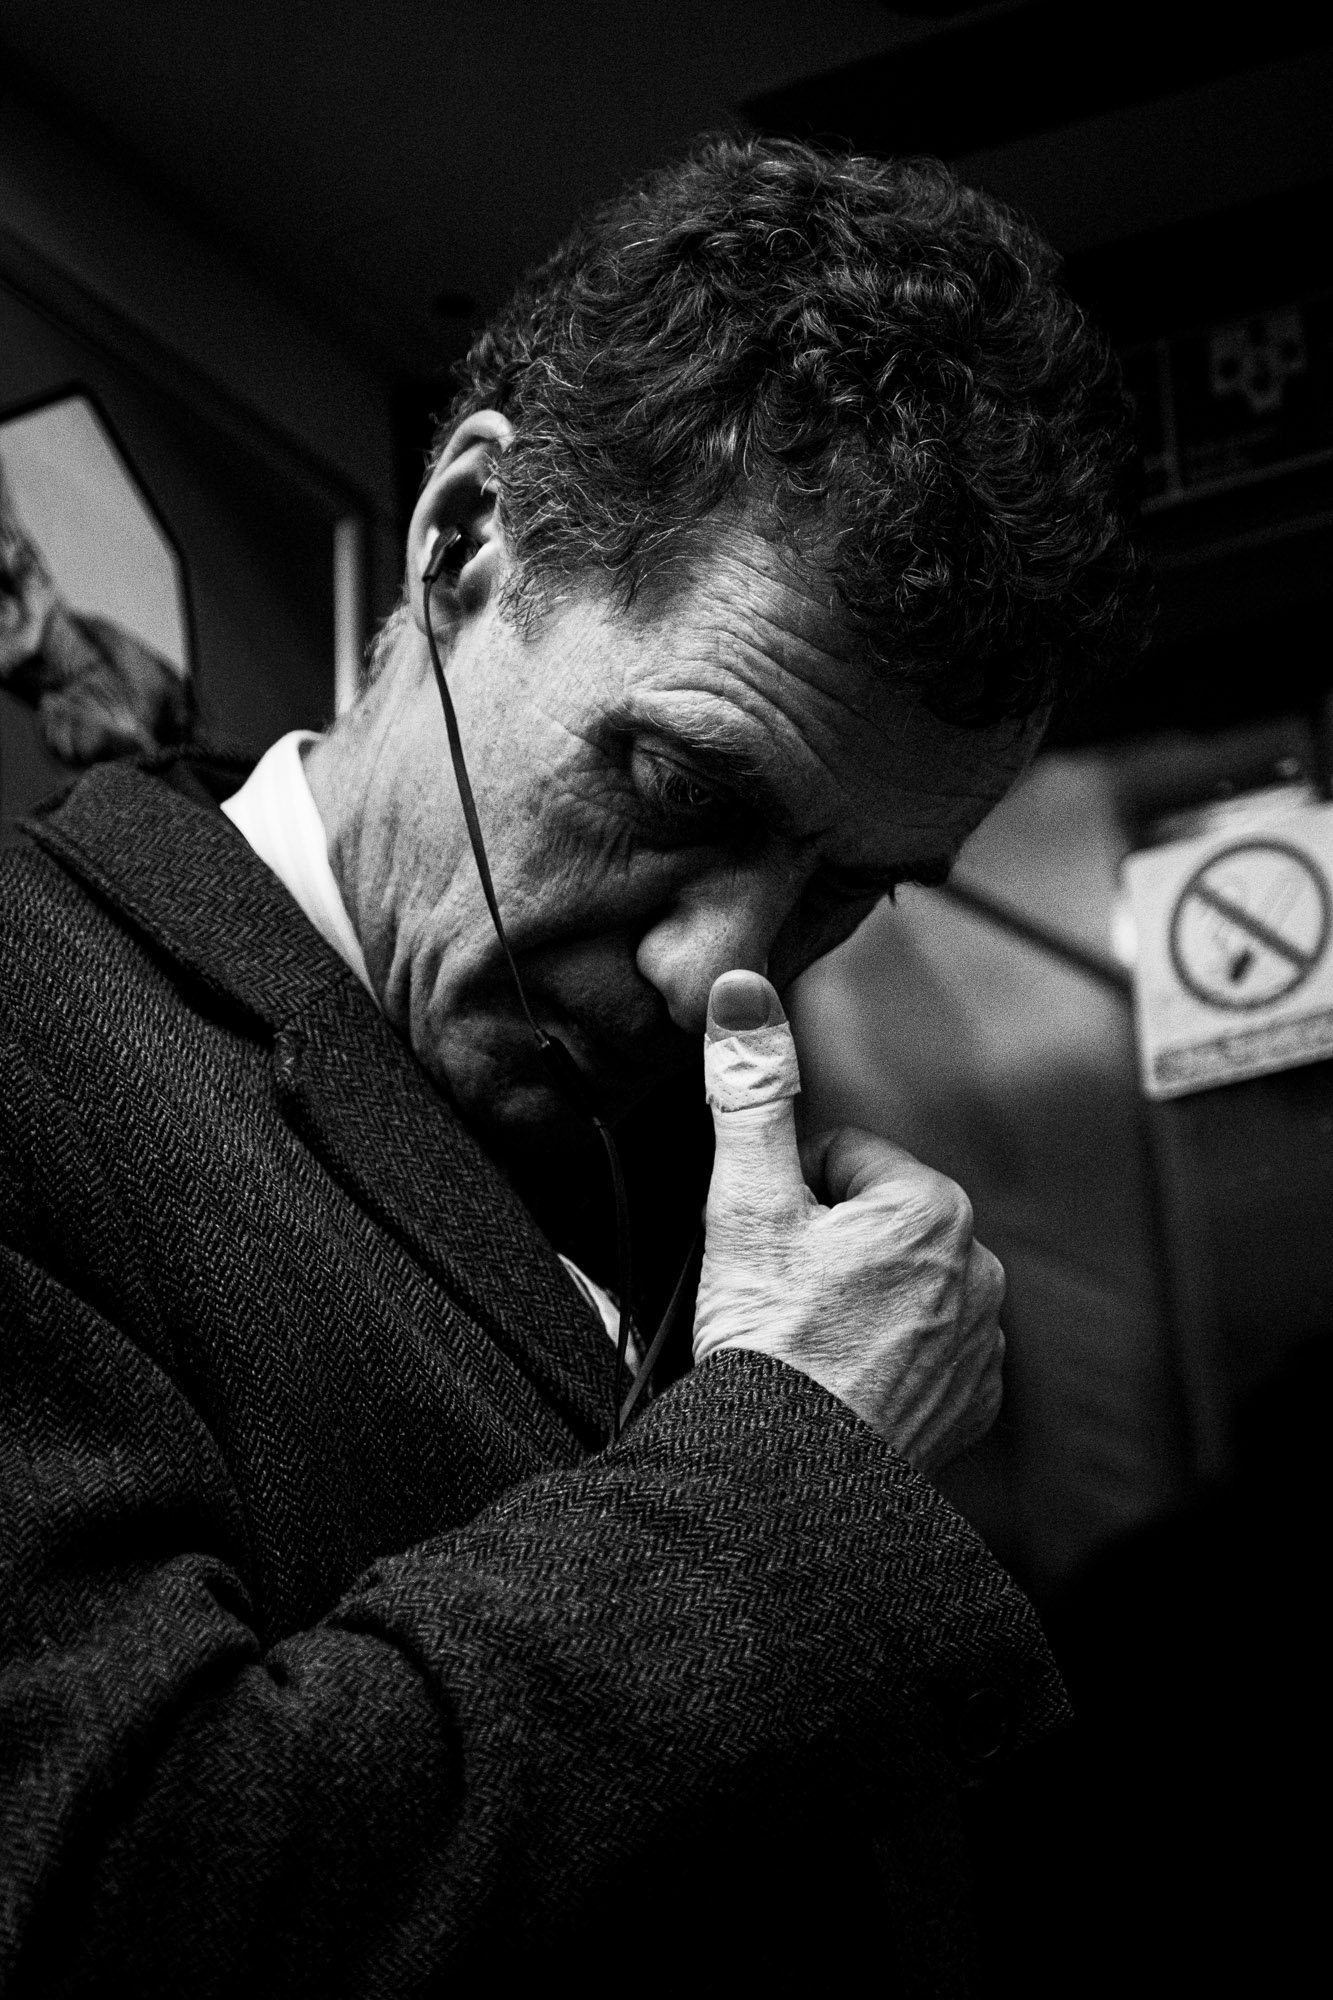 Street Photography - Black and White - Fujifilm - Andy Kirby - MrKirby Photography-04.jpg